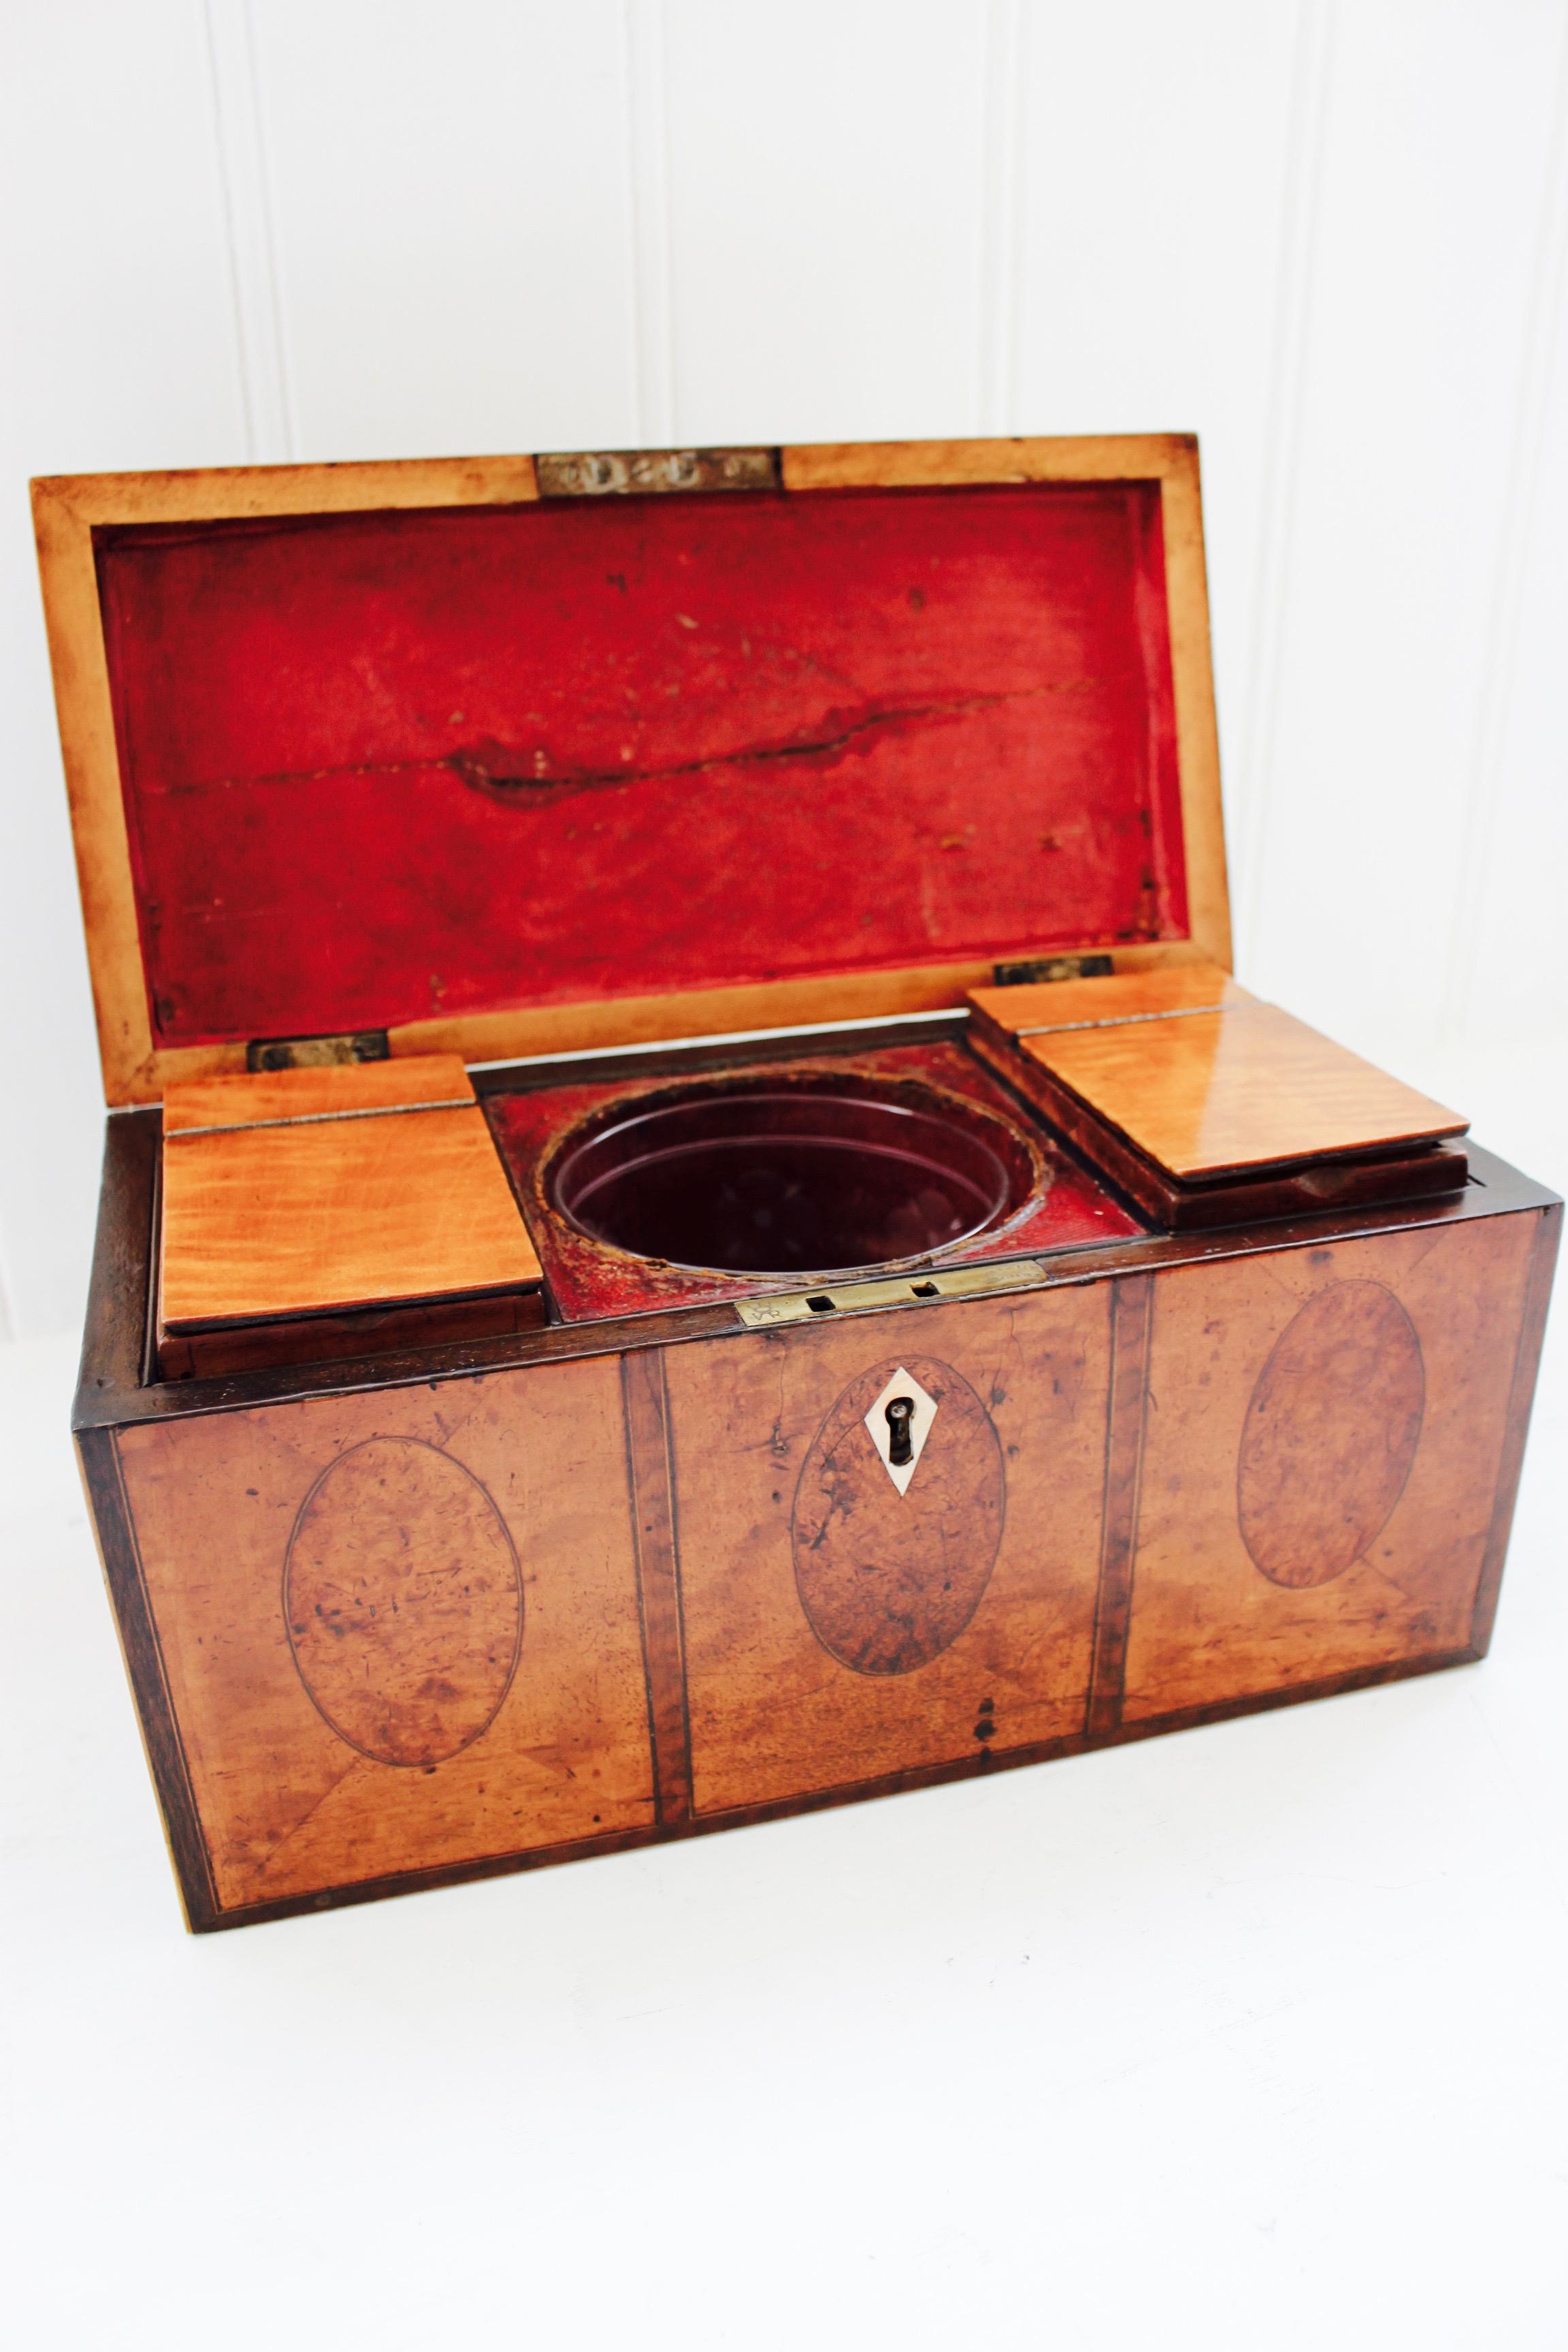 A George III satinwood, amboyna and silver-mounted tea caddy, circa 1780. Rectangular shape, the top and sides with satinwood panels centred on oval amboyna panels, the silver handle with passant lion mark and crest. Internally with twin caddies